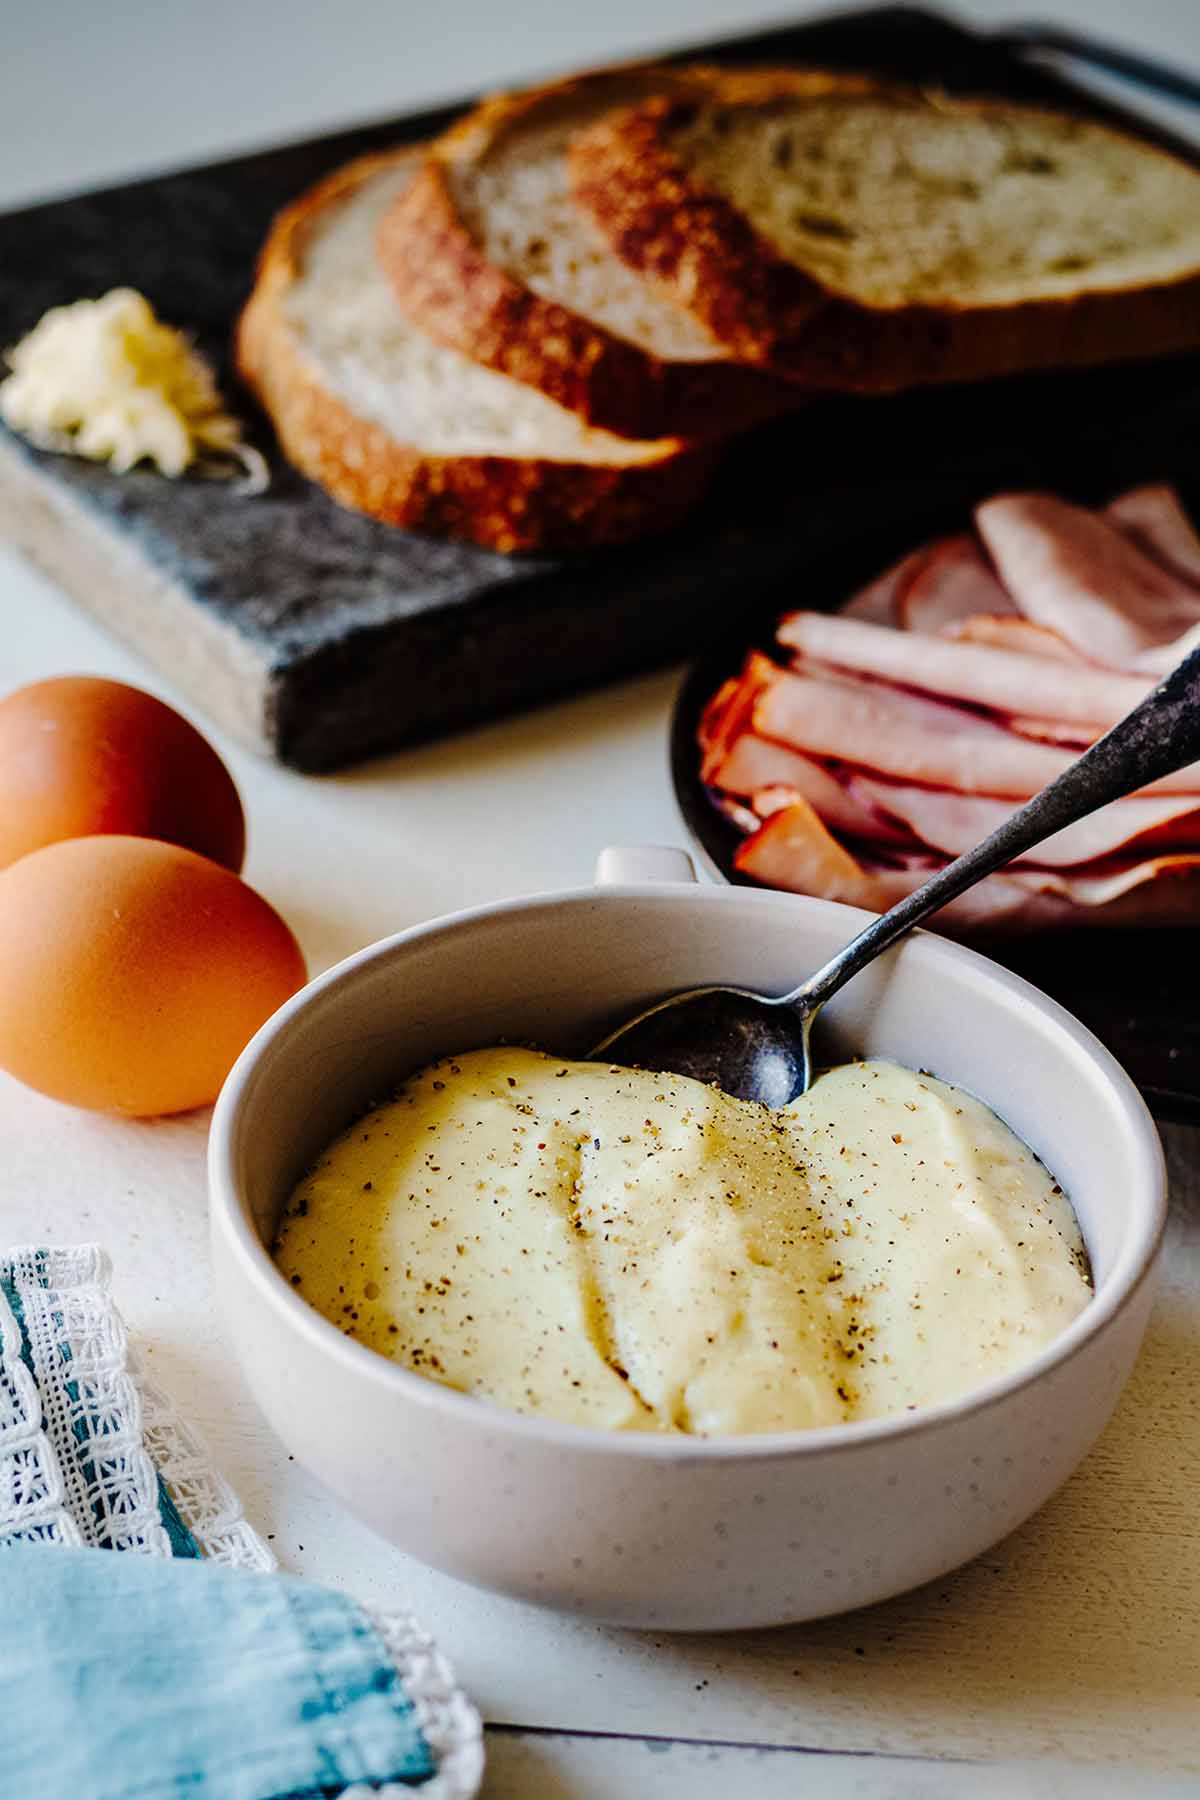 Croque madame sauce in a bowl with a spoon. Ham, eggs and sliced bread are in the background.